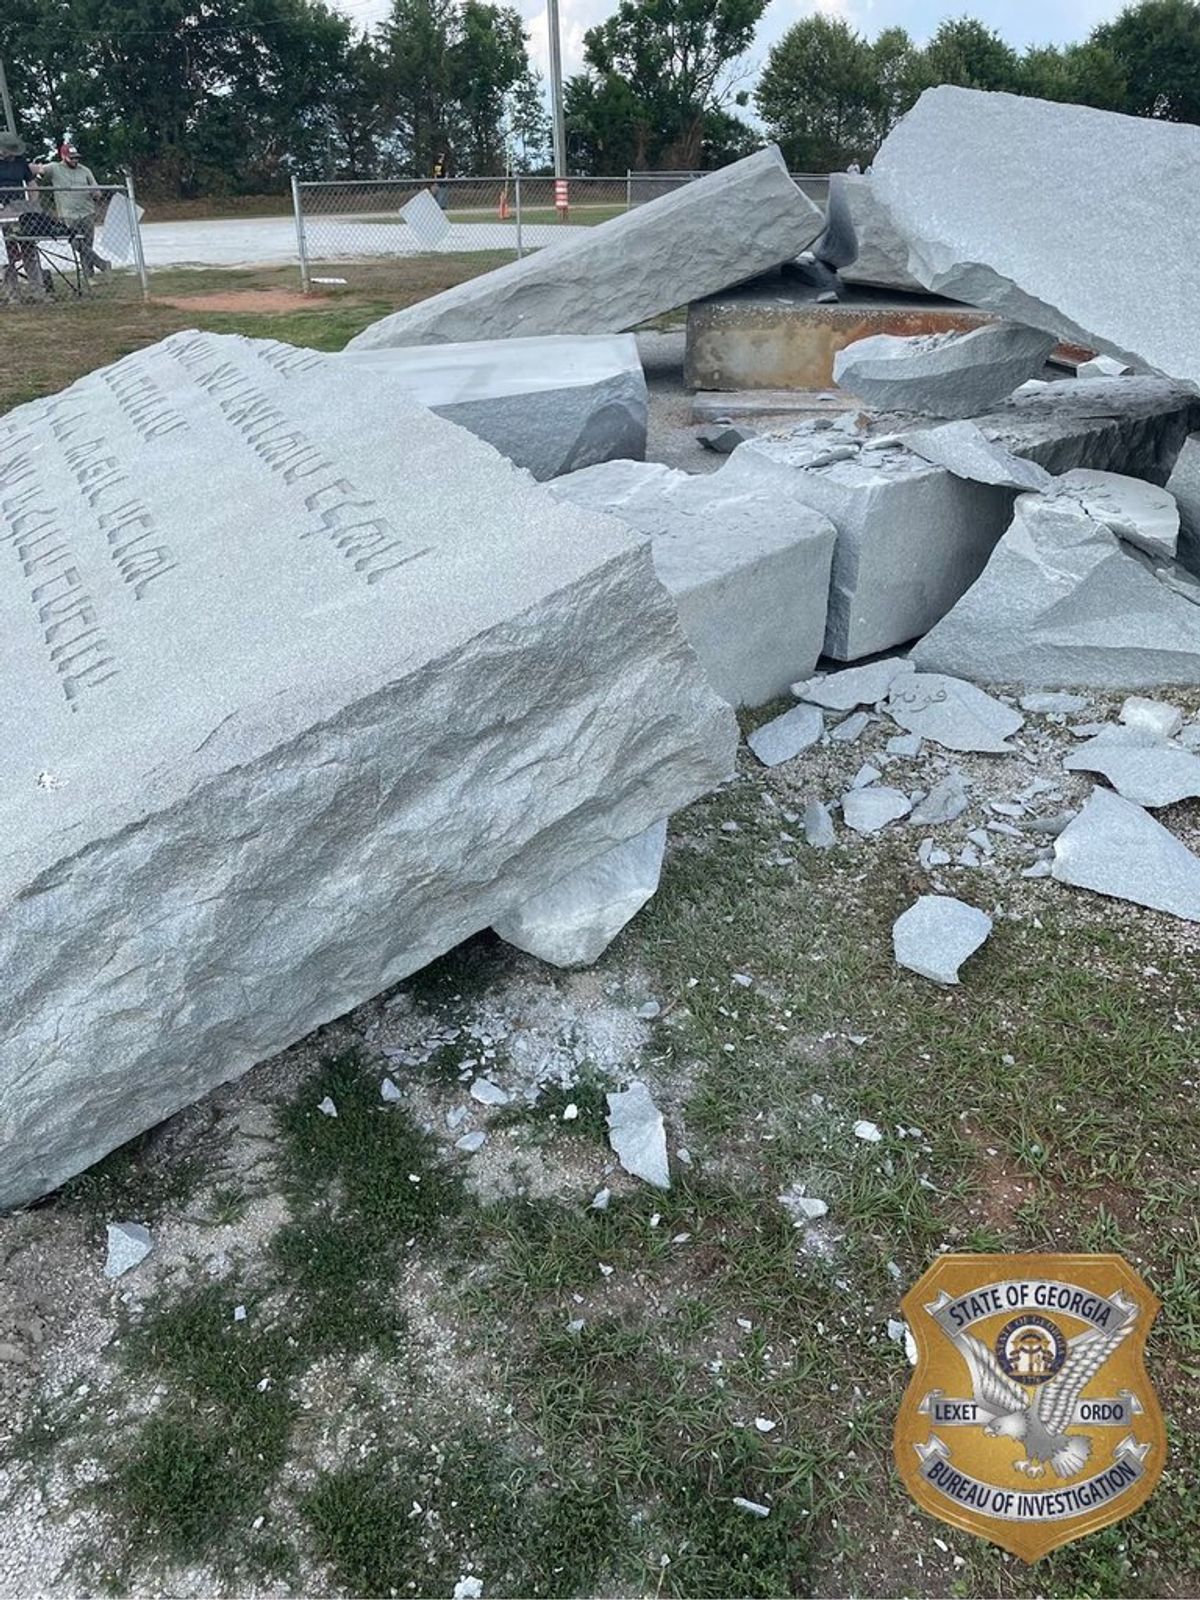 The Georgia Guidestones were demolished after an early-morning bombing on 6 July damaged one of the structure's granite slabs. The Georgia Bureau of Investigation says the structure was destoyed for safety reasons. Picture courtesy of Georgia Bureau of Investigation via Twitter.